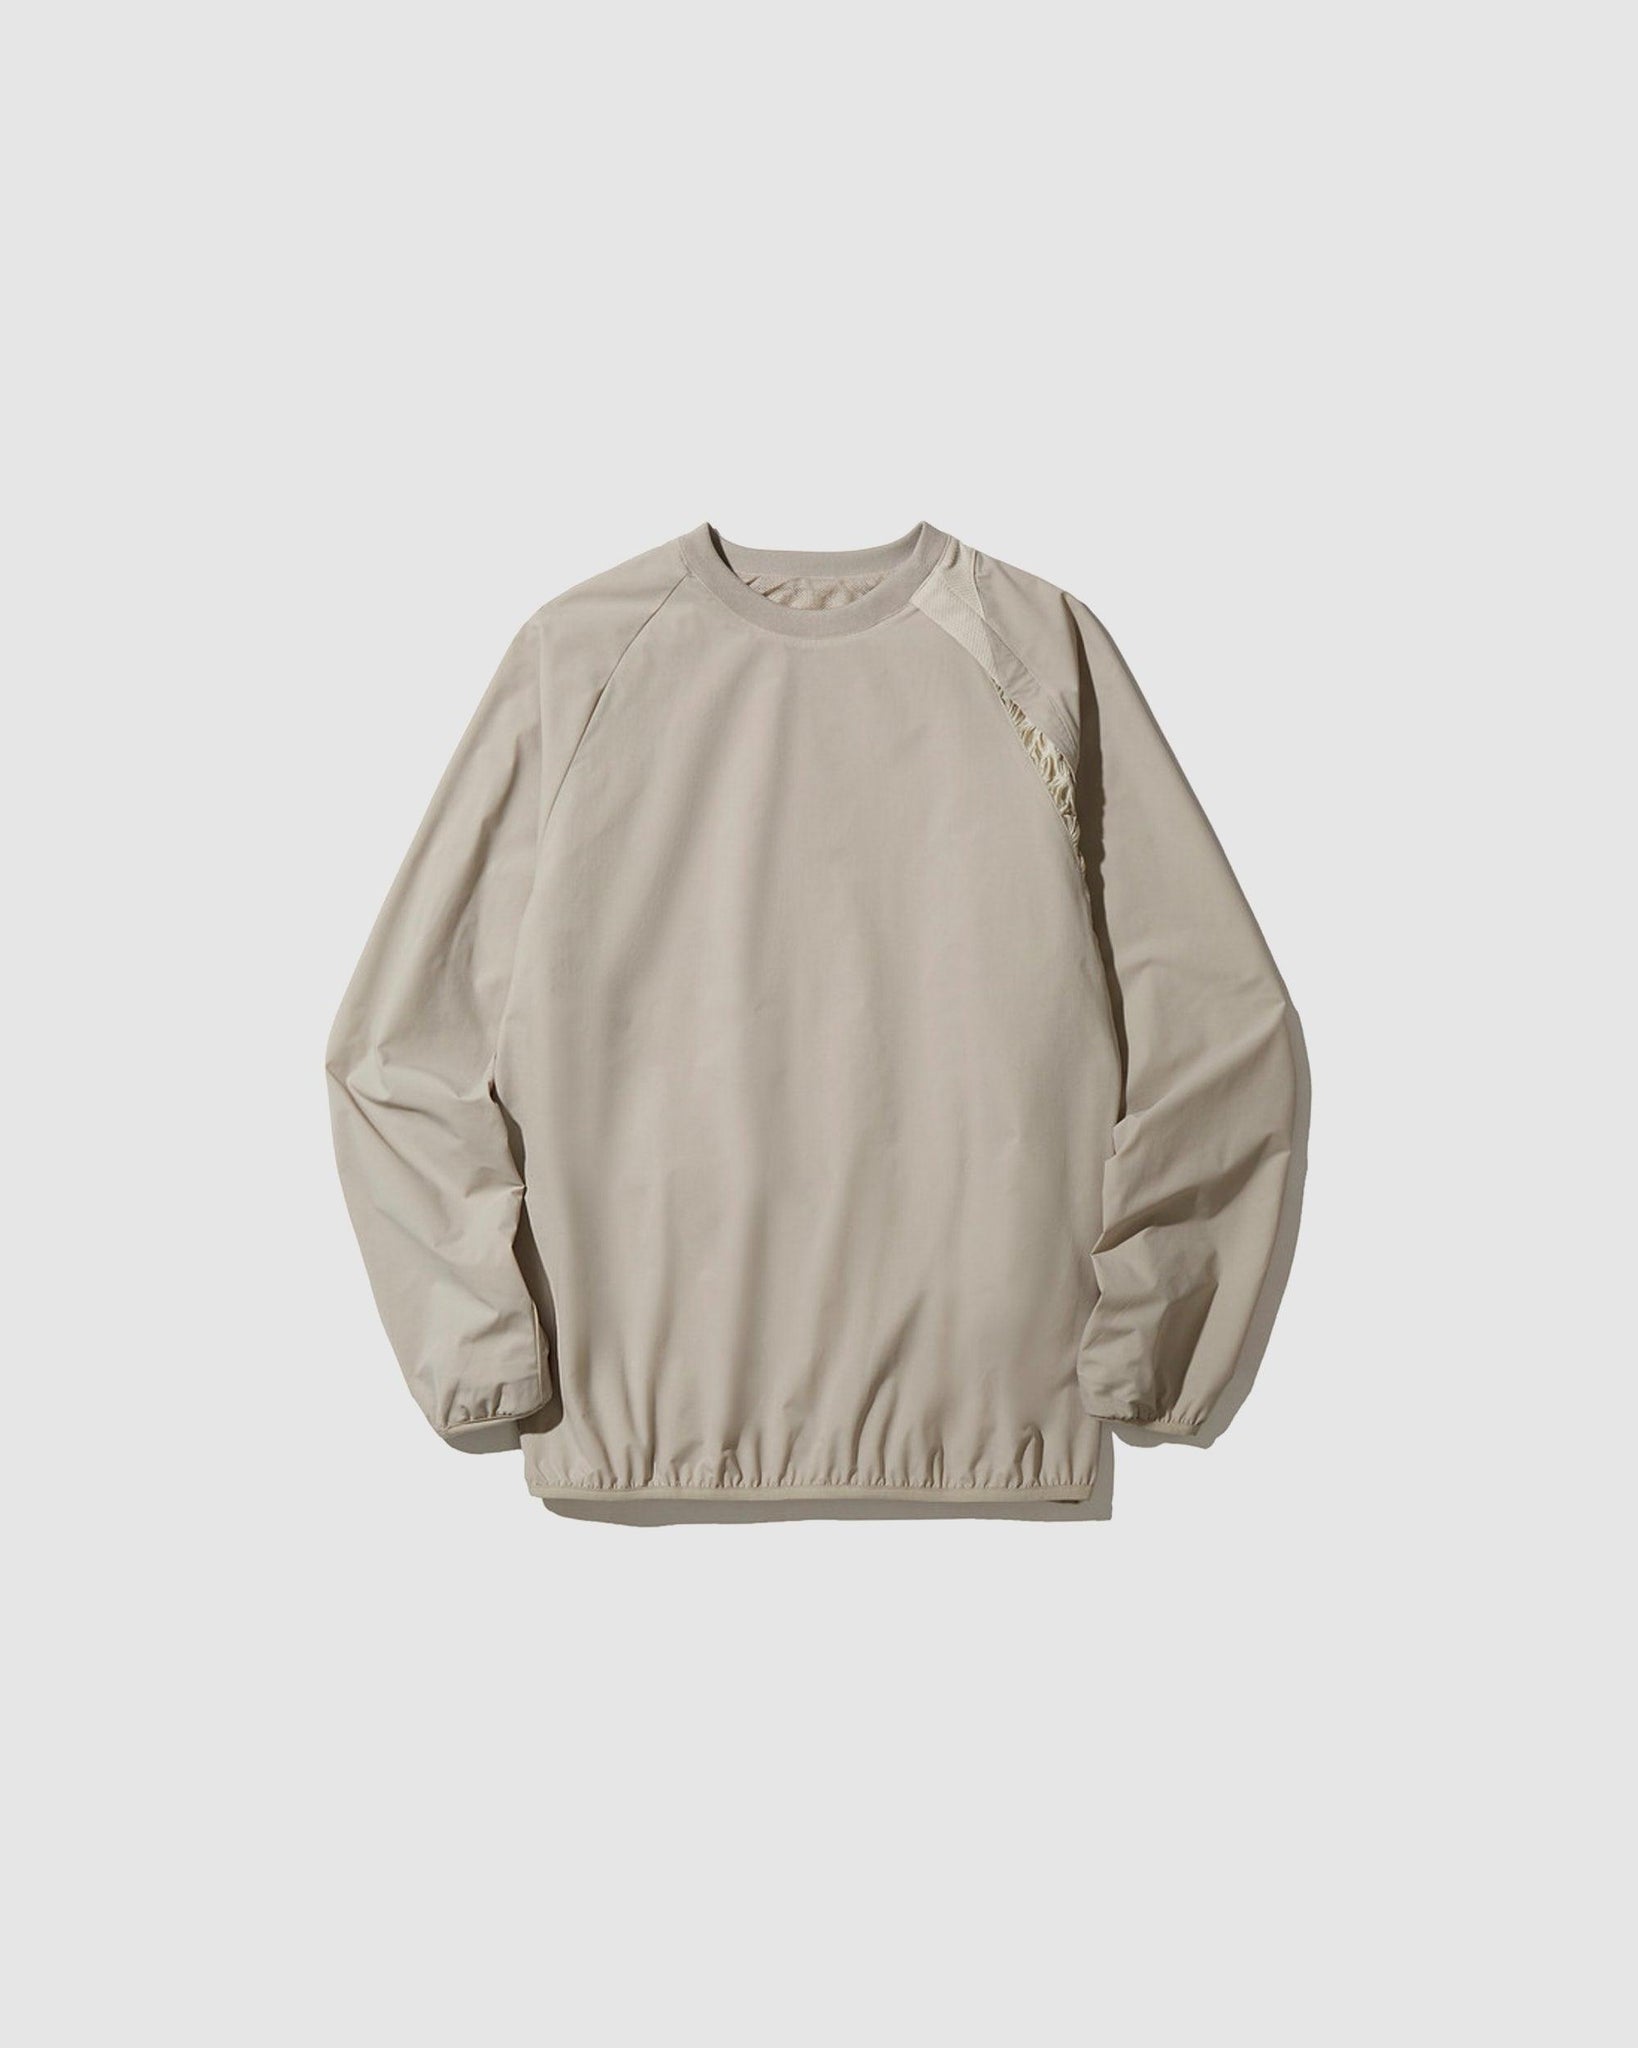 01 Warm Up Shirt - {{ collection.title }} - Chinatown Country Club 